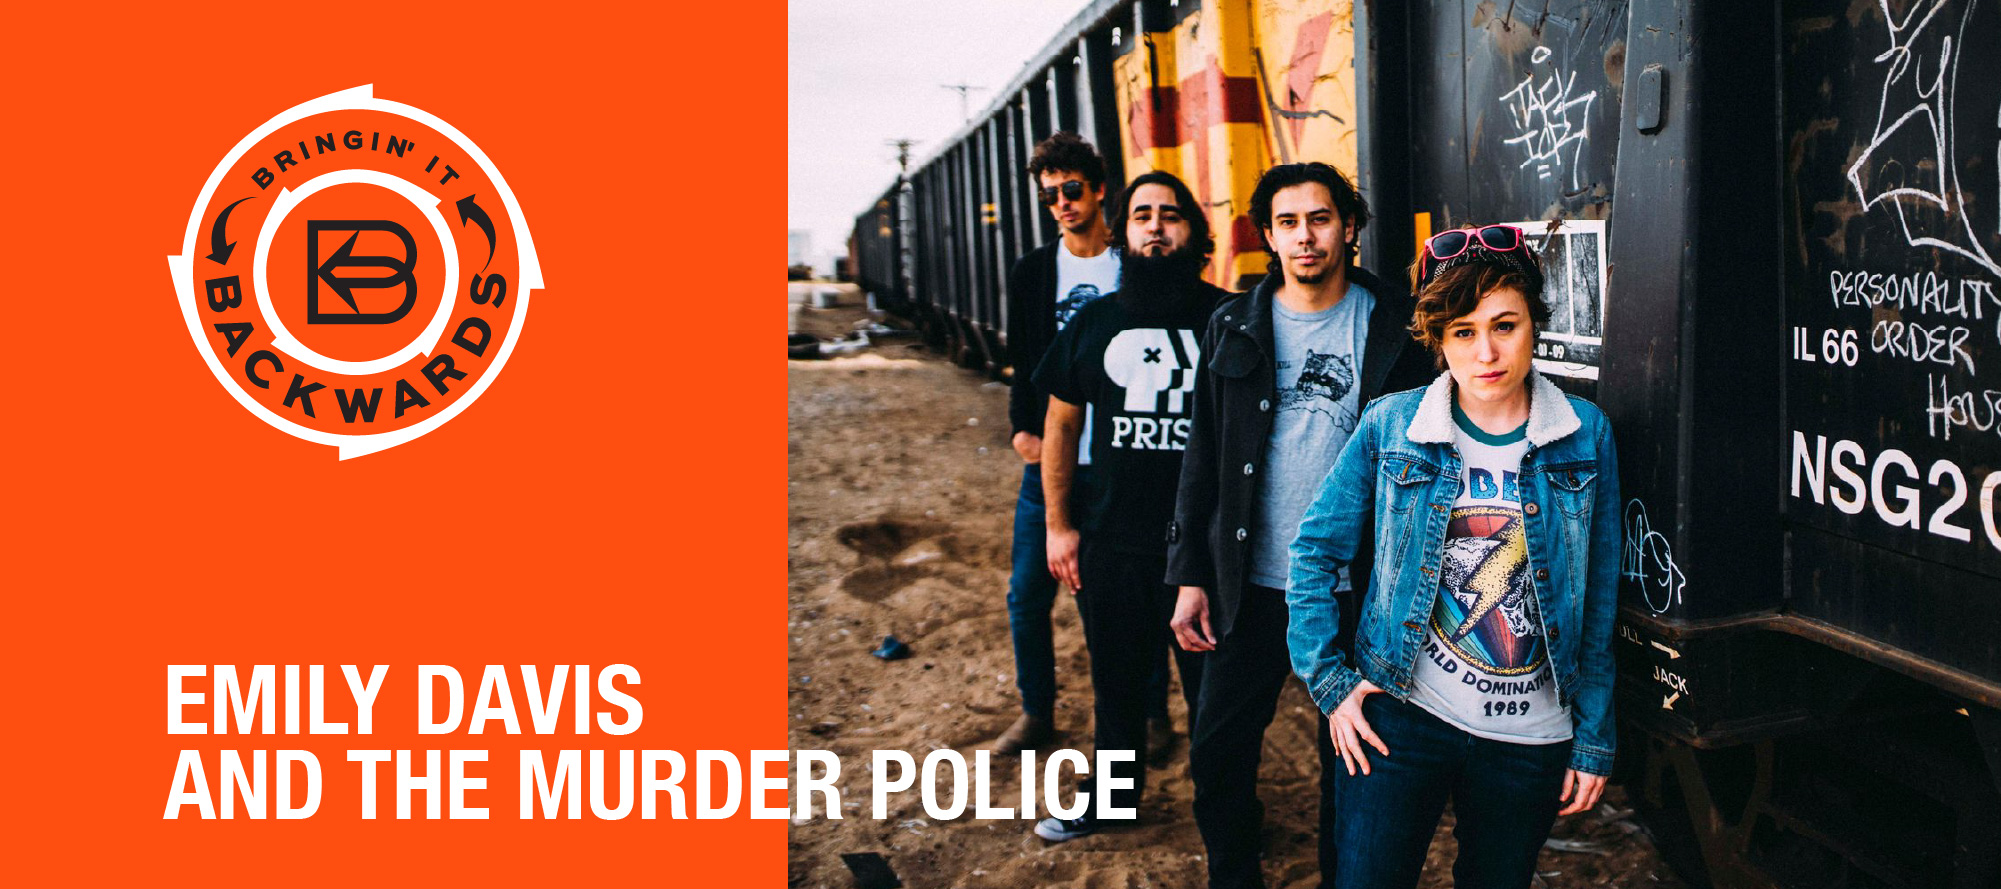 Bringin’ it Backwards: Interview with Emily Davis and the Murder Police